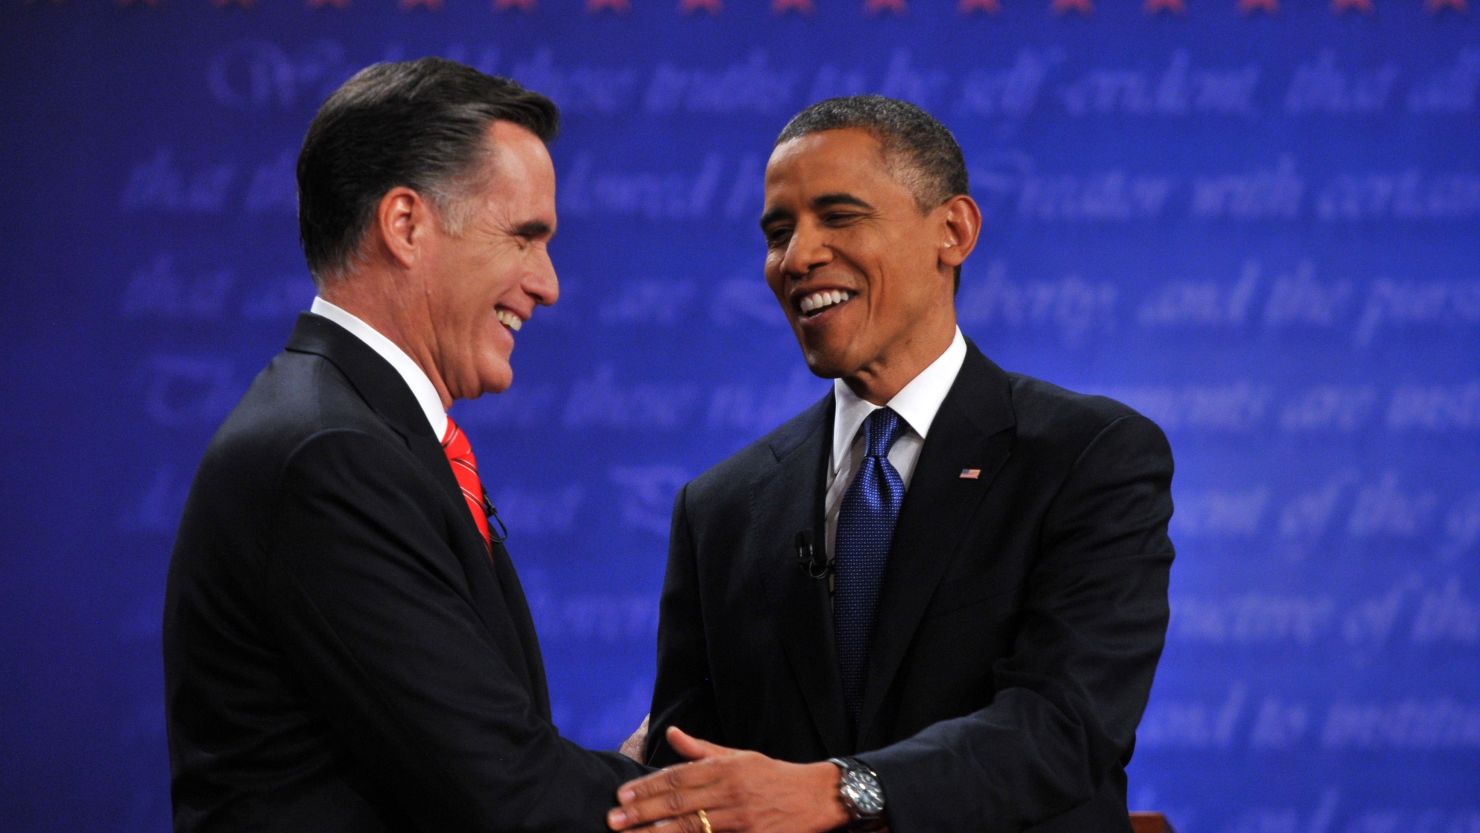 Health care was mentioned about six minutes into Wednesday night's presidential debate.